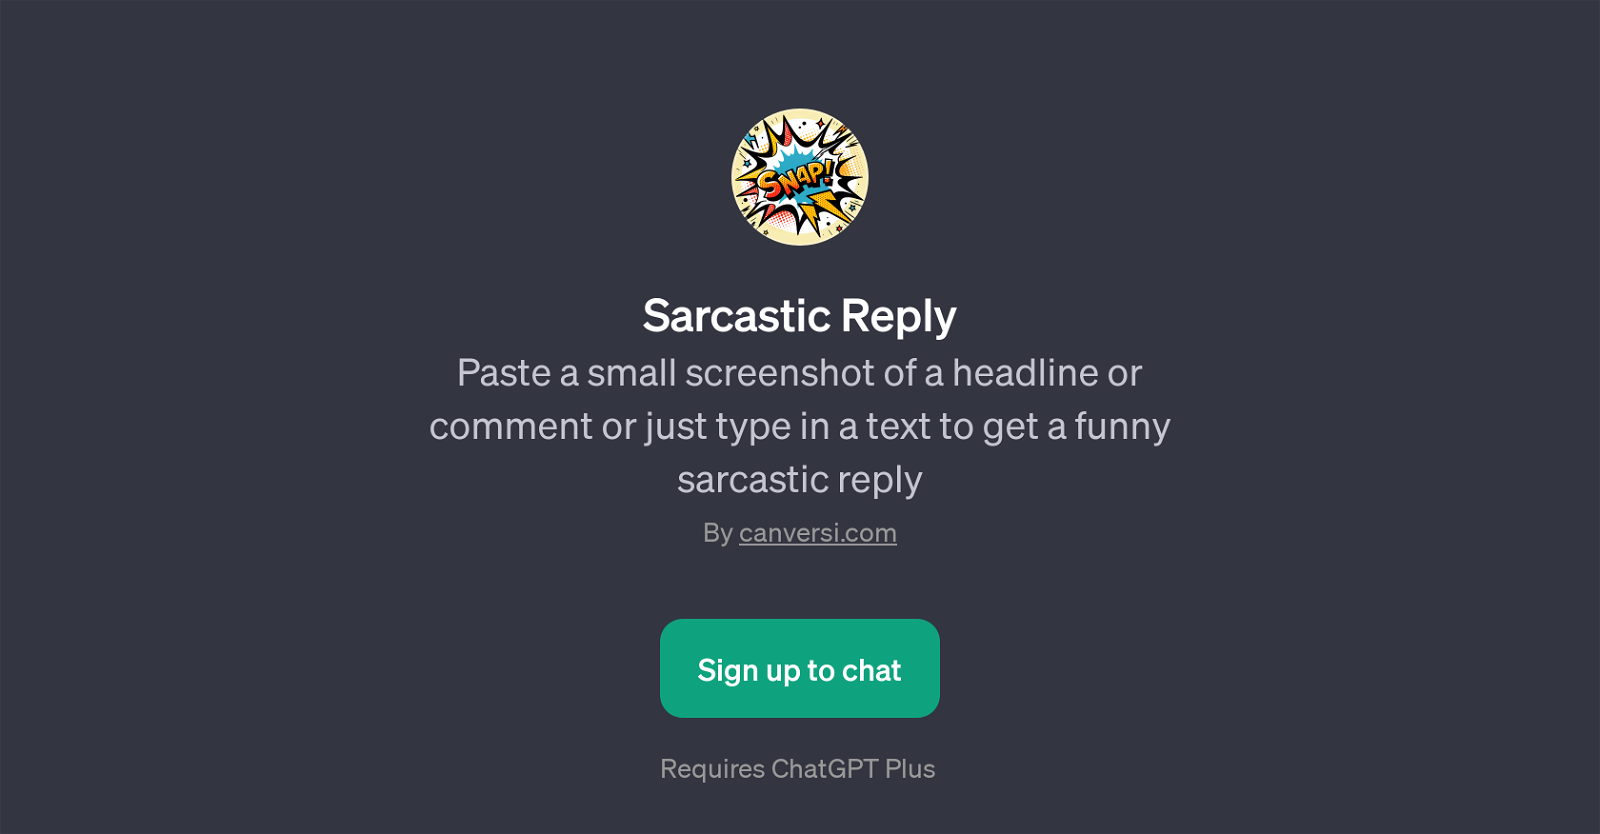 Sarcastic Reply website